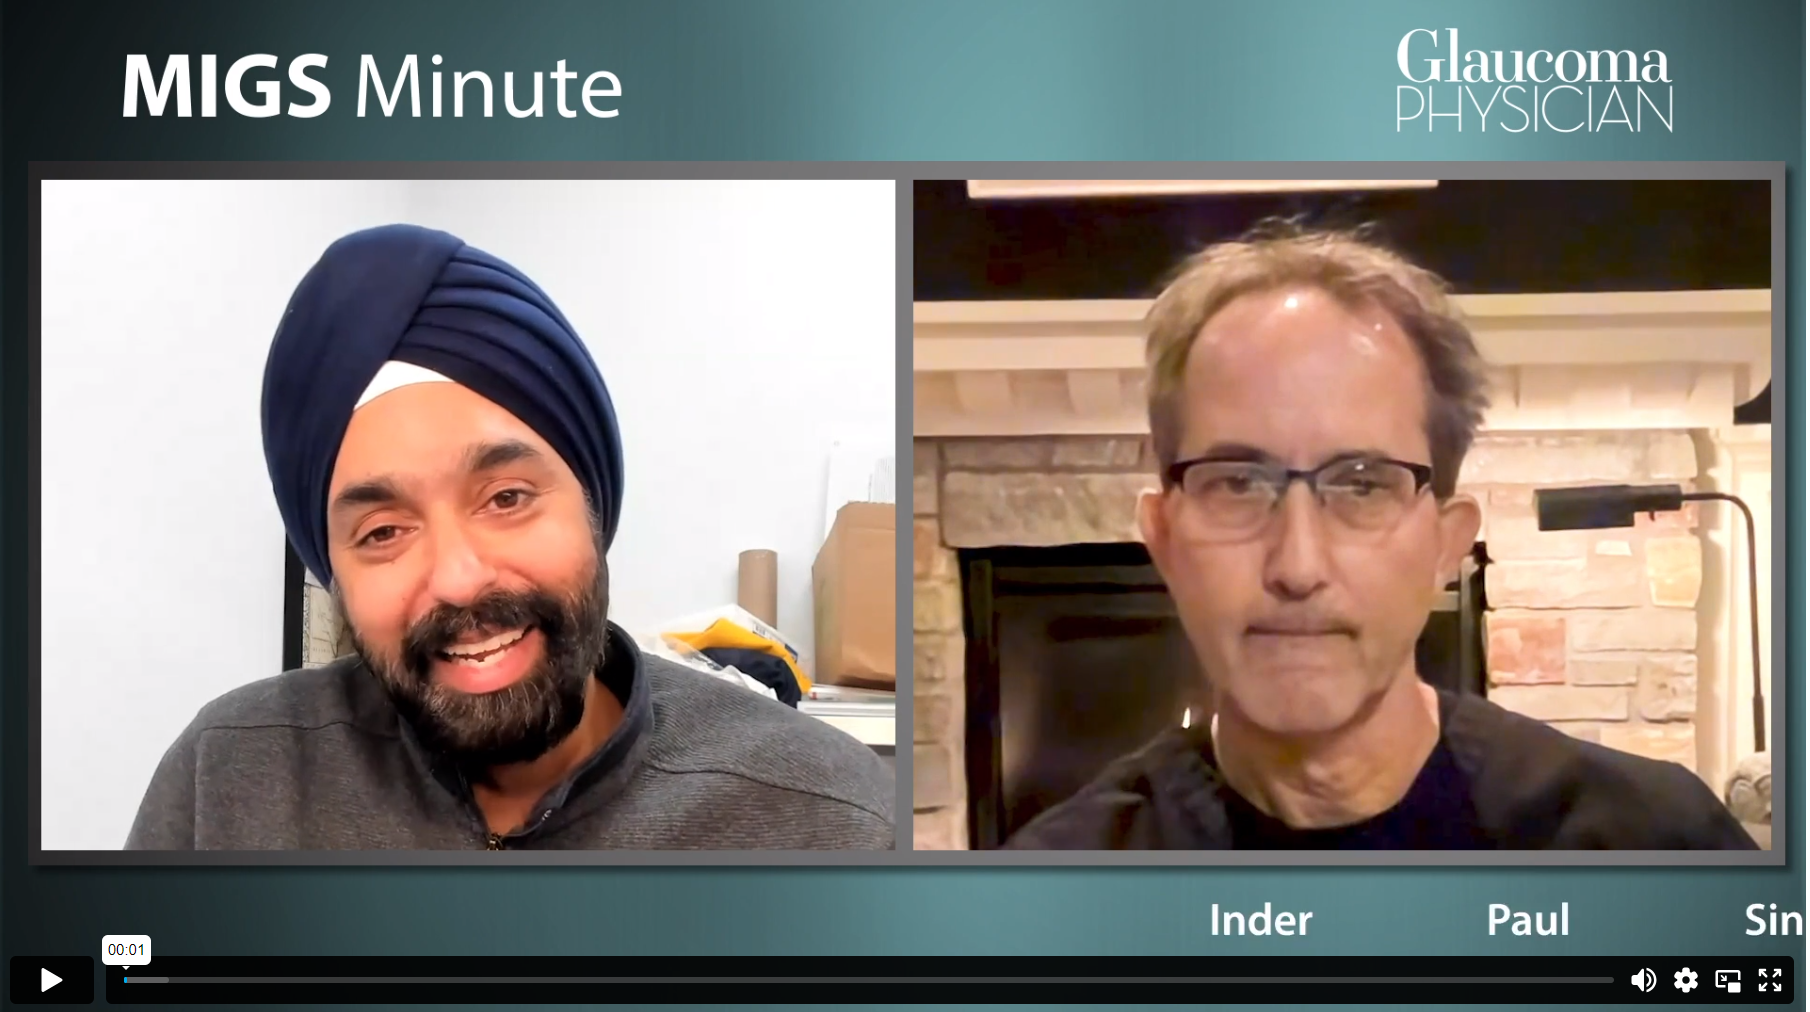 Episode 11: Inder Paul Singh, MD and Thomas Samuelson, MD discuss how to approach therapeutic options with patients.